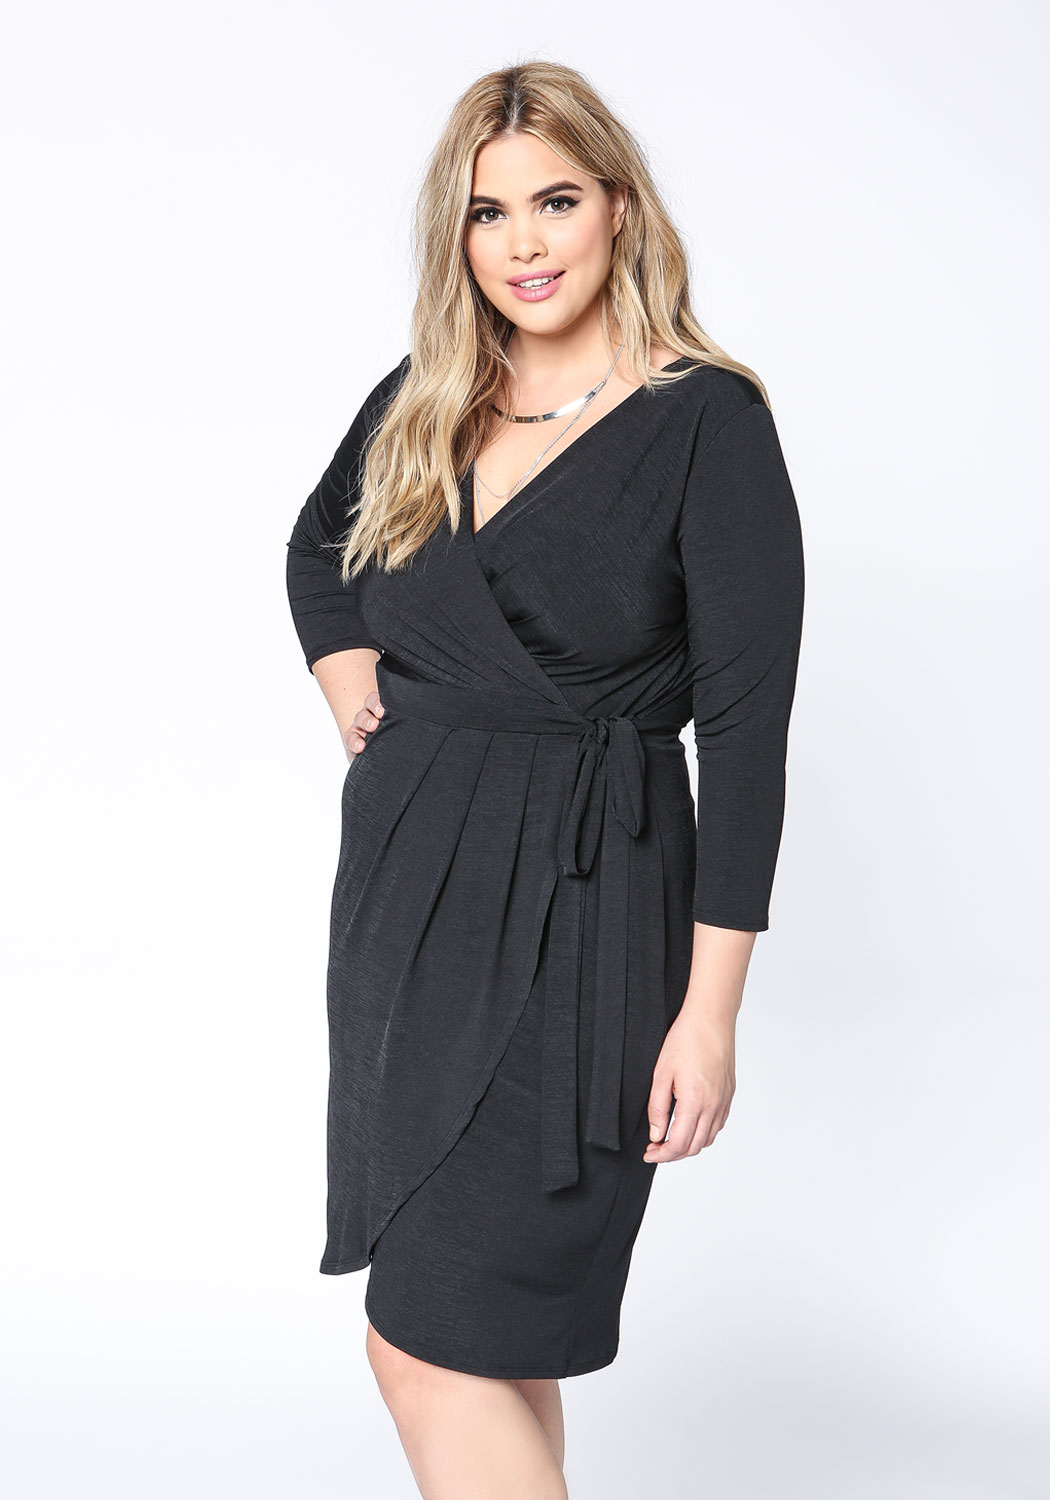 7 Essentials in Plus Size Clothing for Women - Lurap Clothing